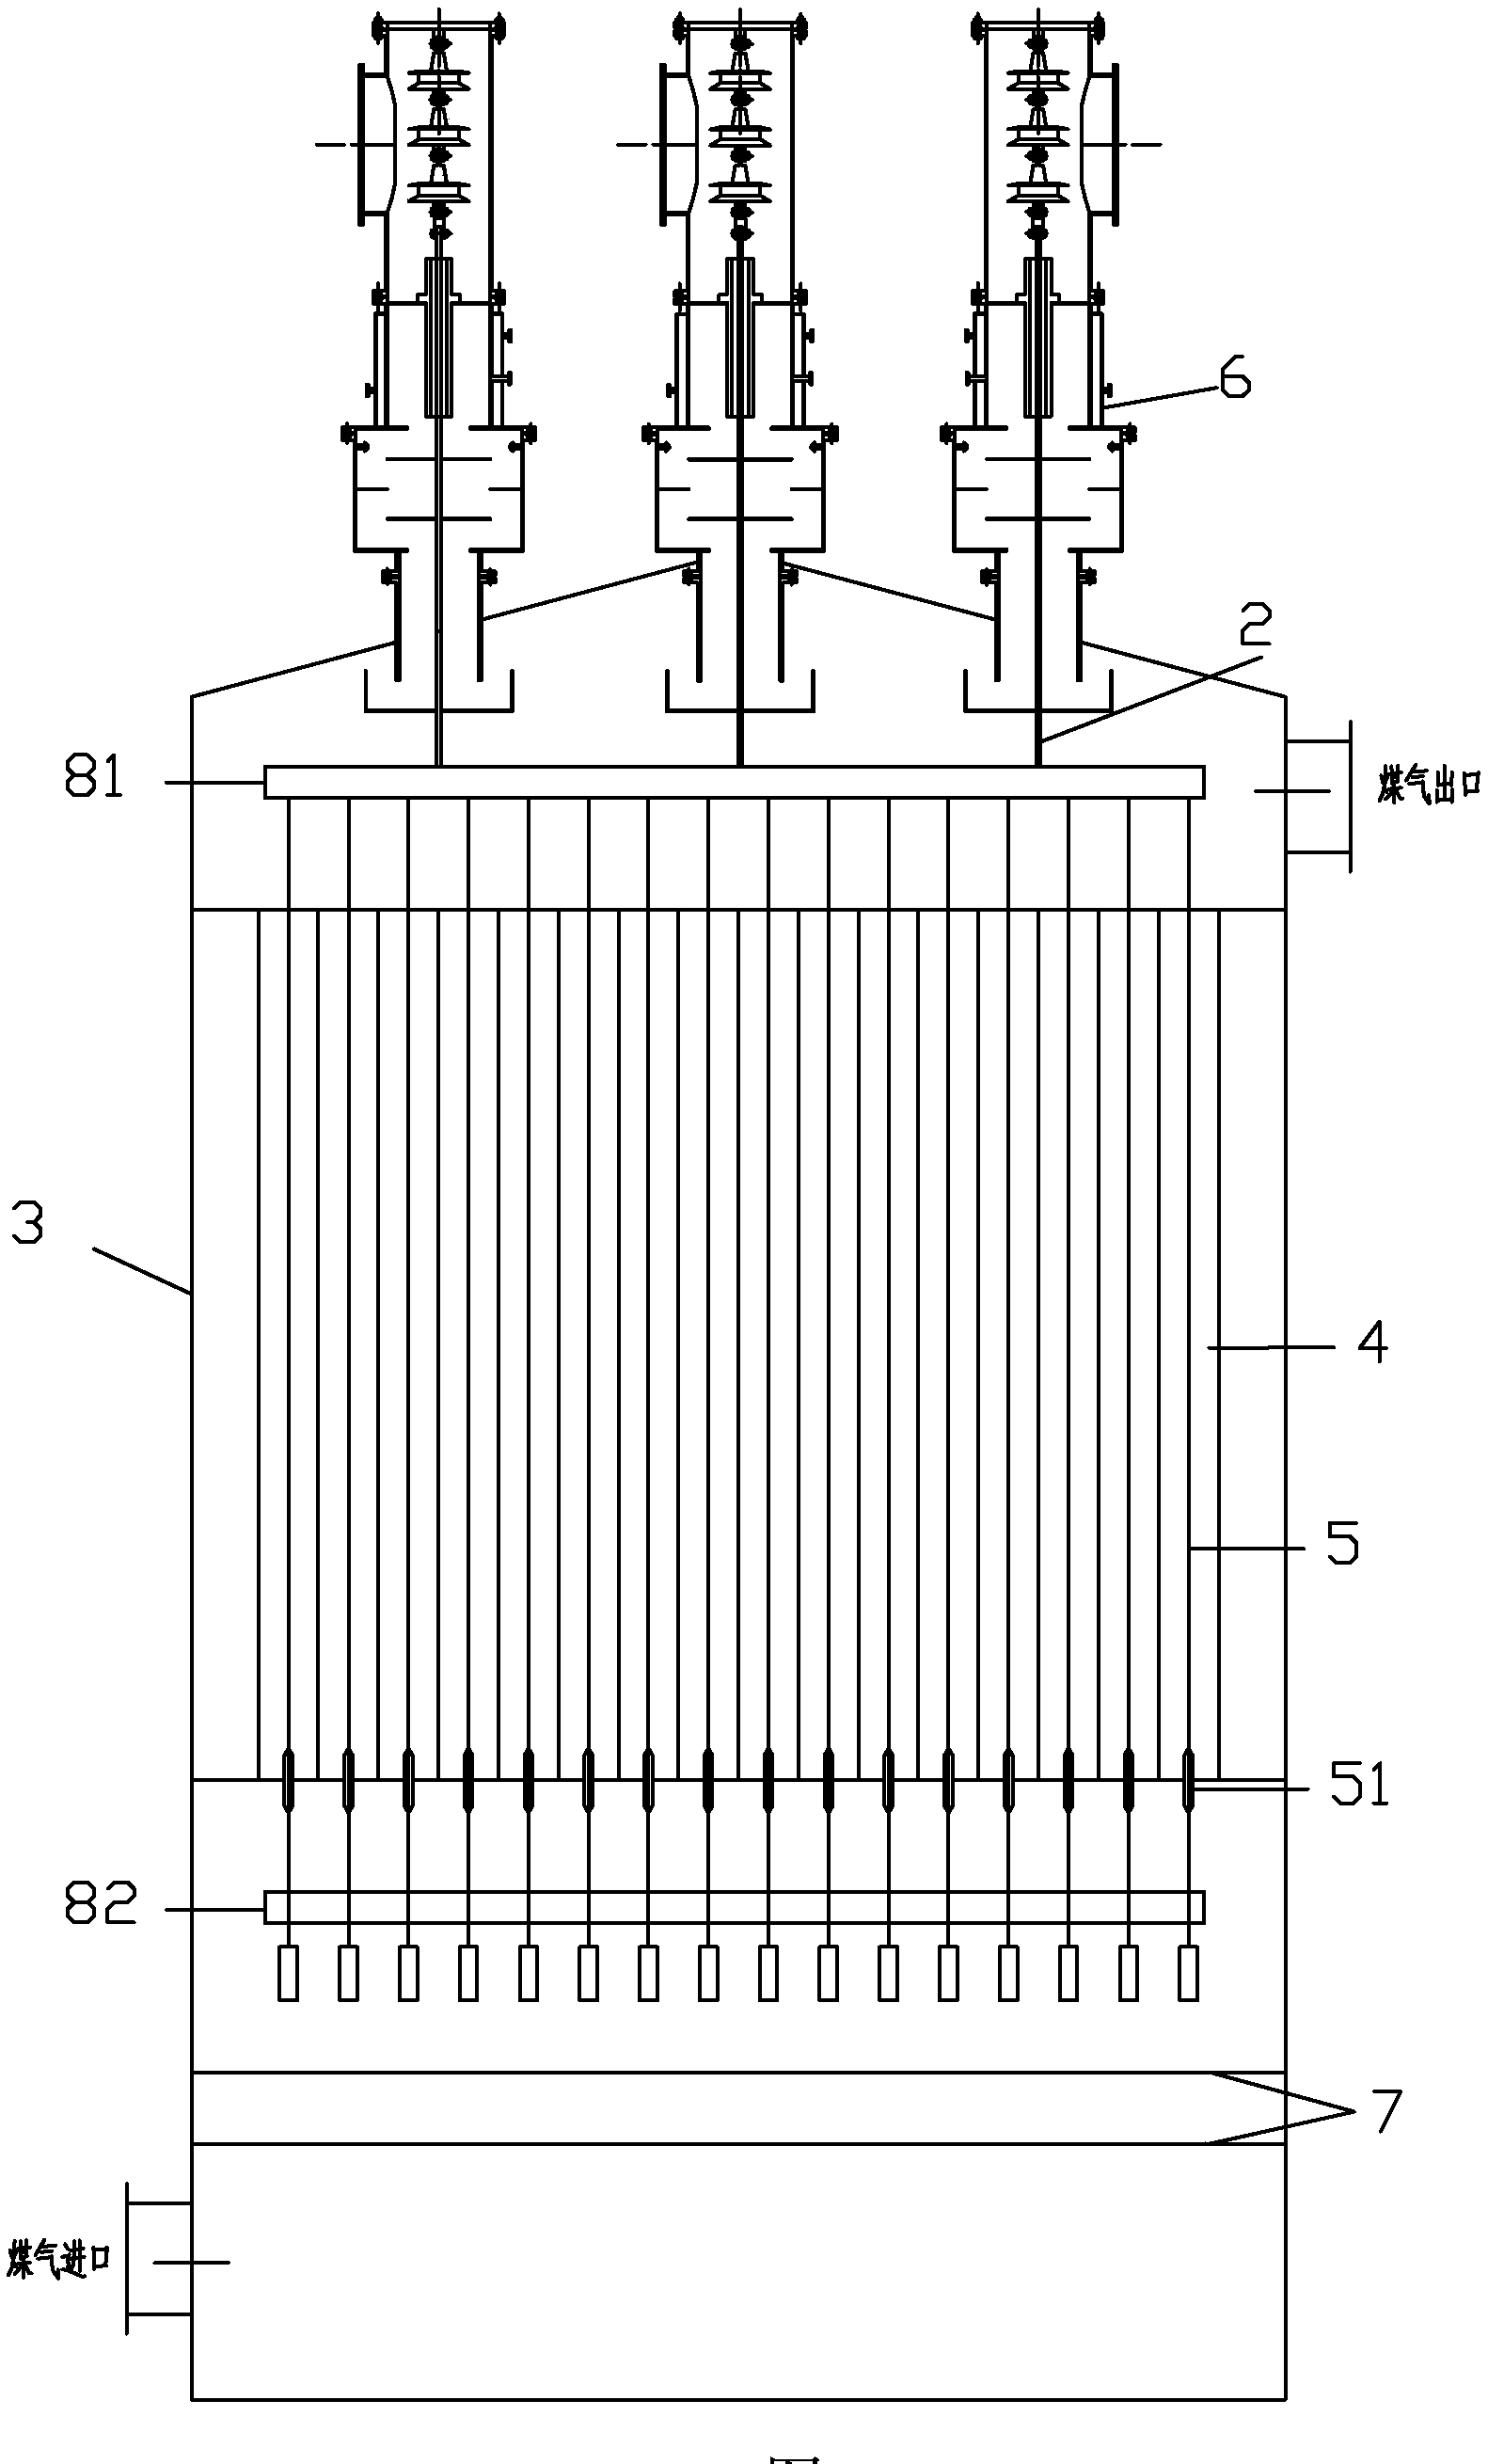 Low-energy-consumption insulator box and electric tar-catching device